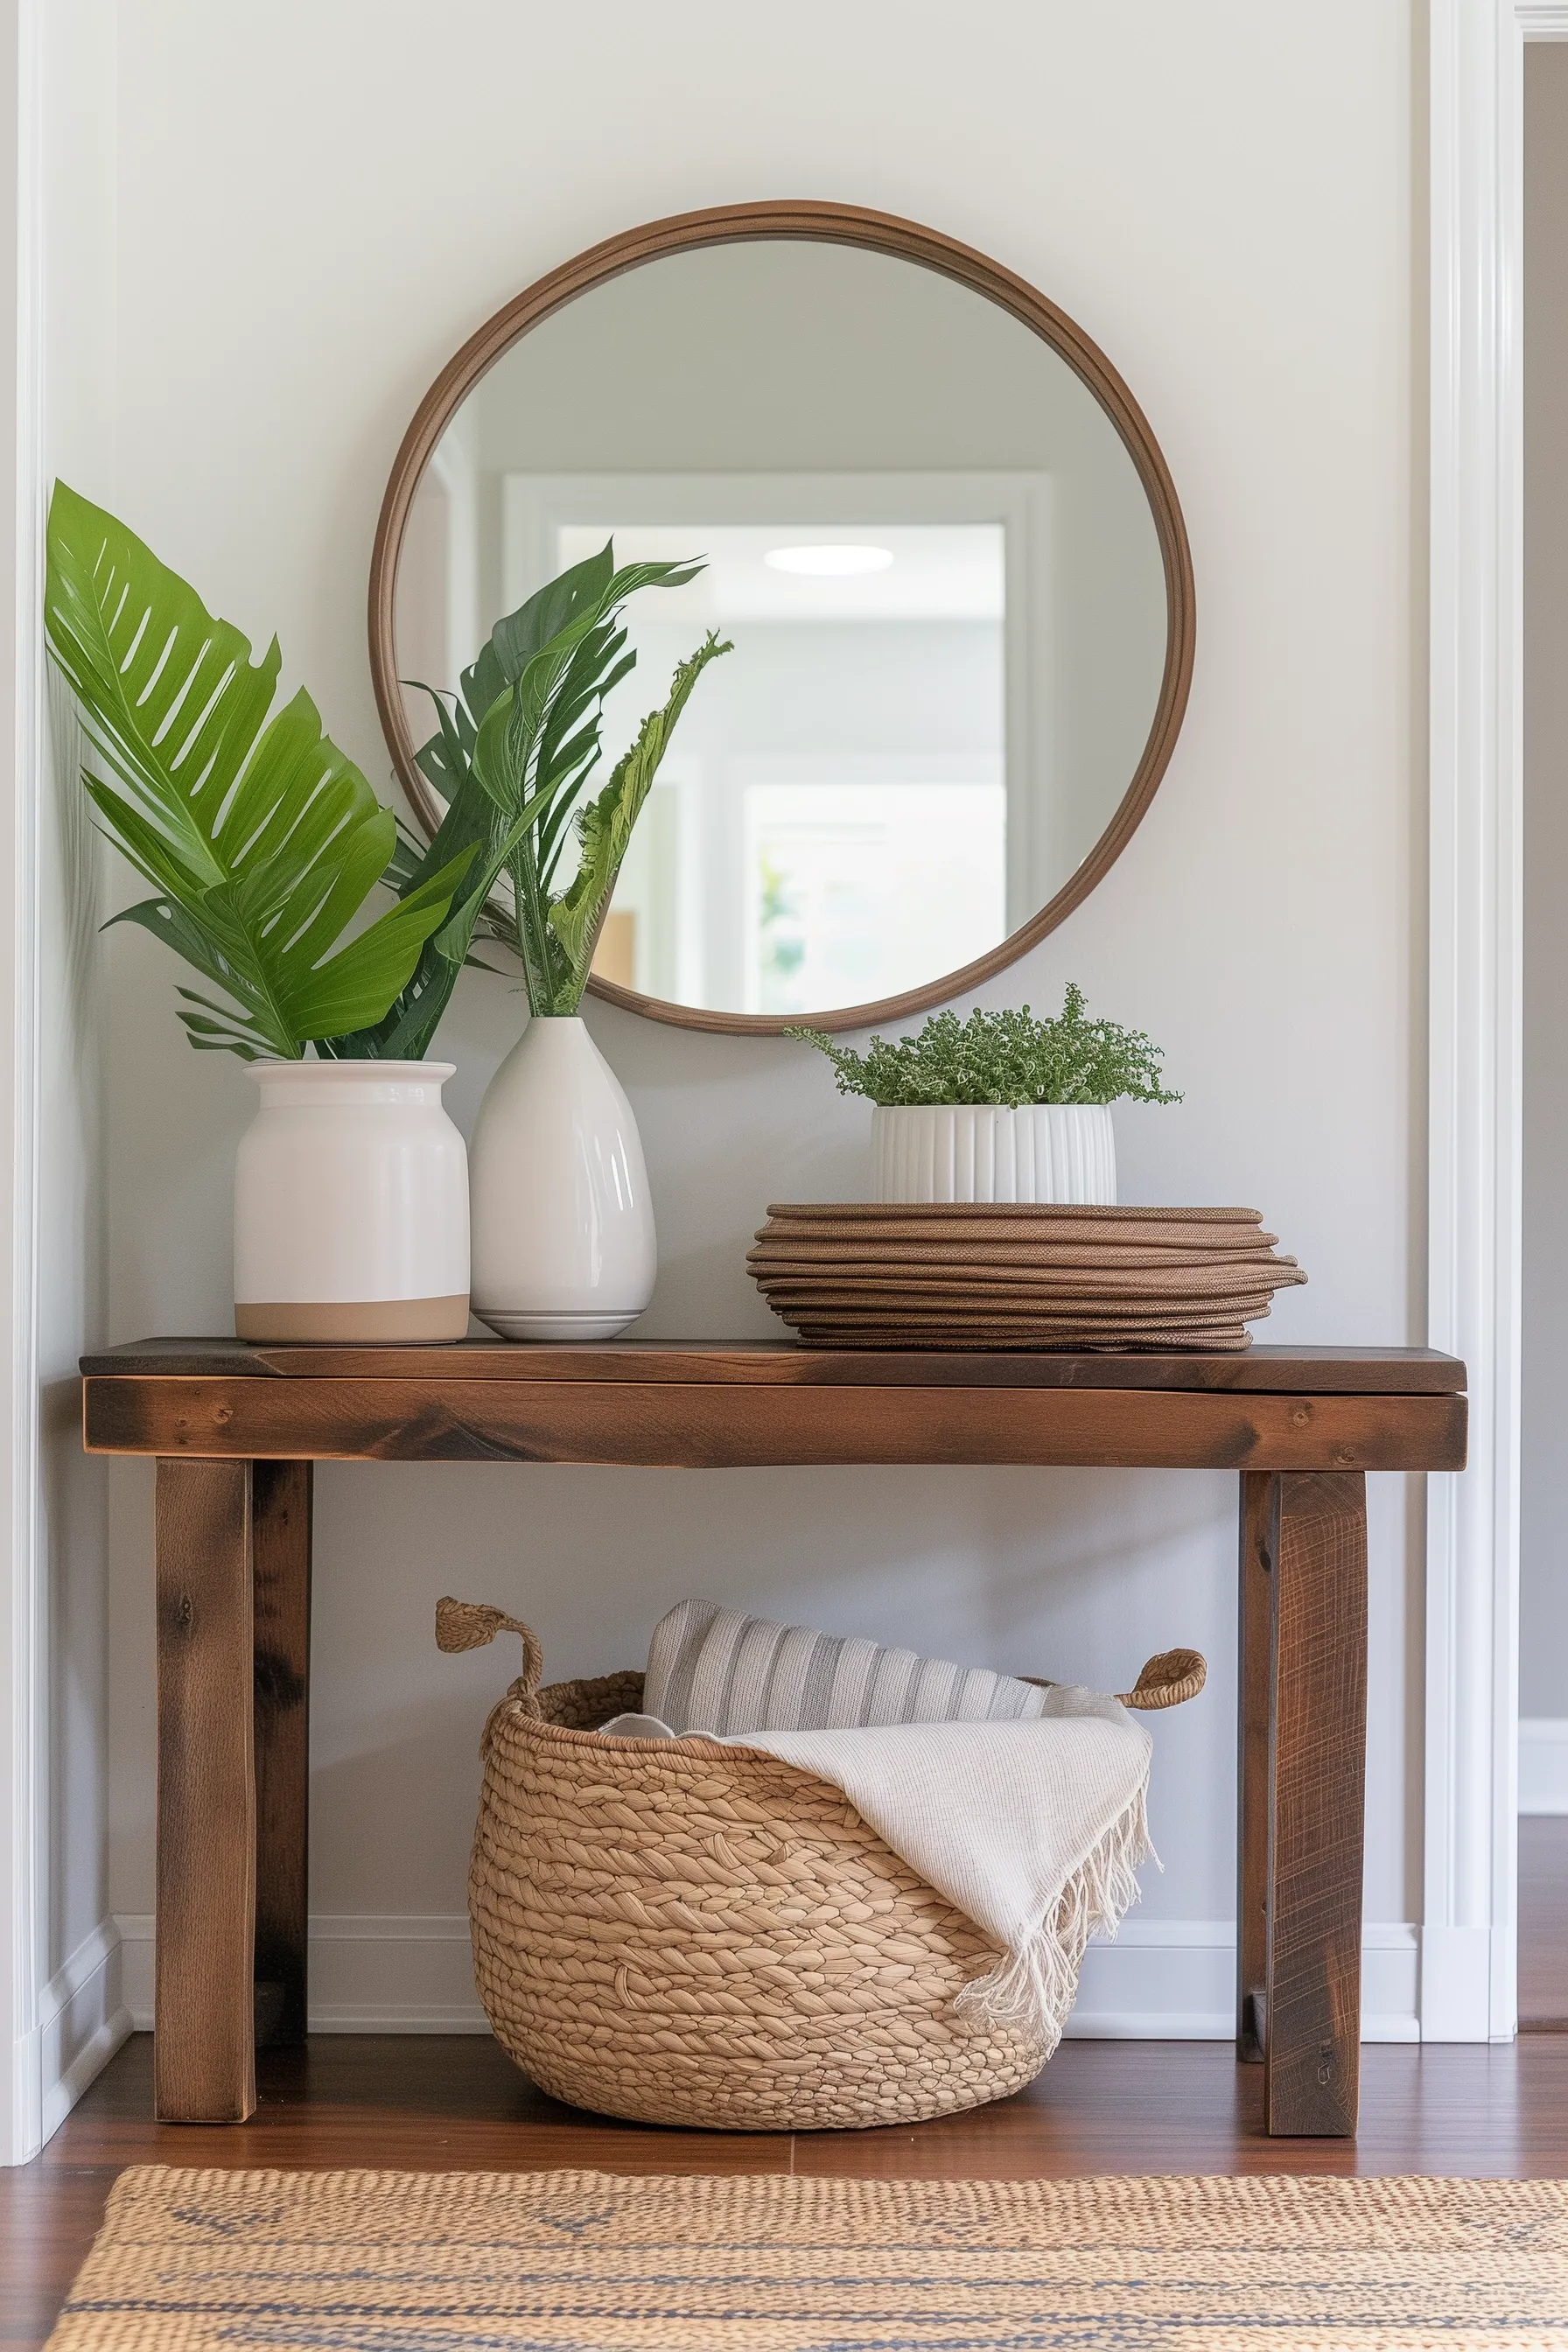 A wooden table with a big plant and circle mirror